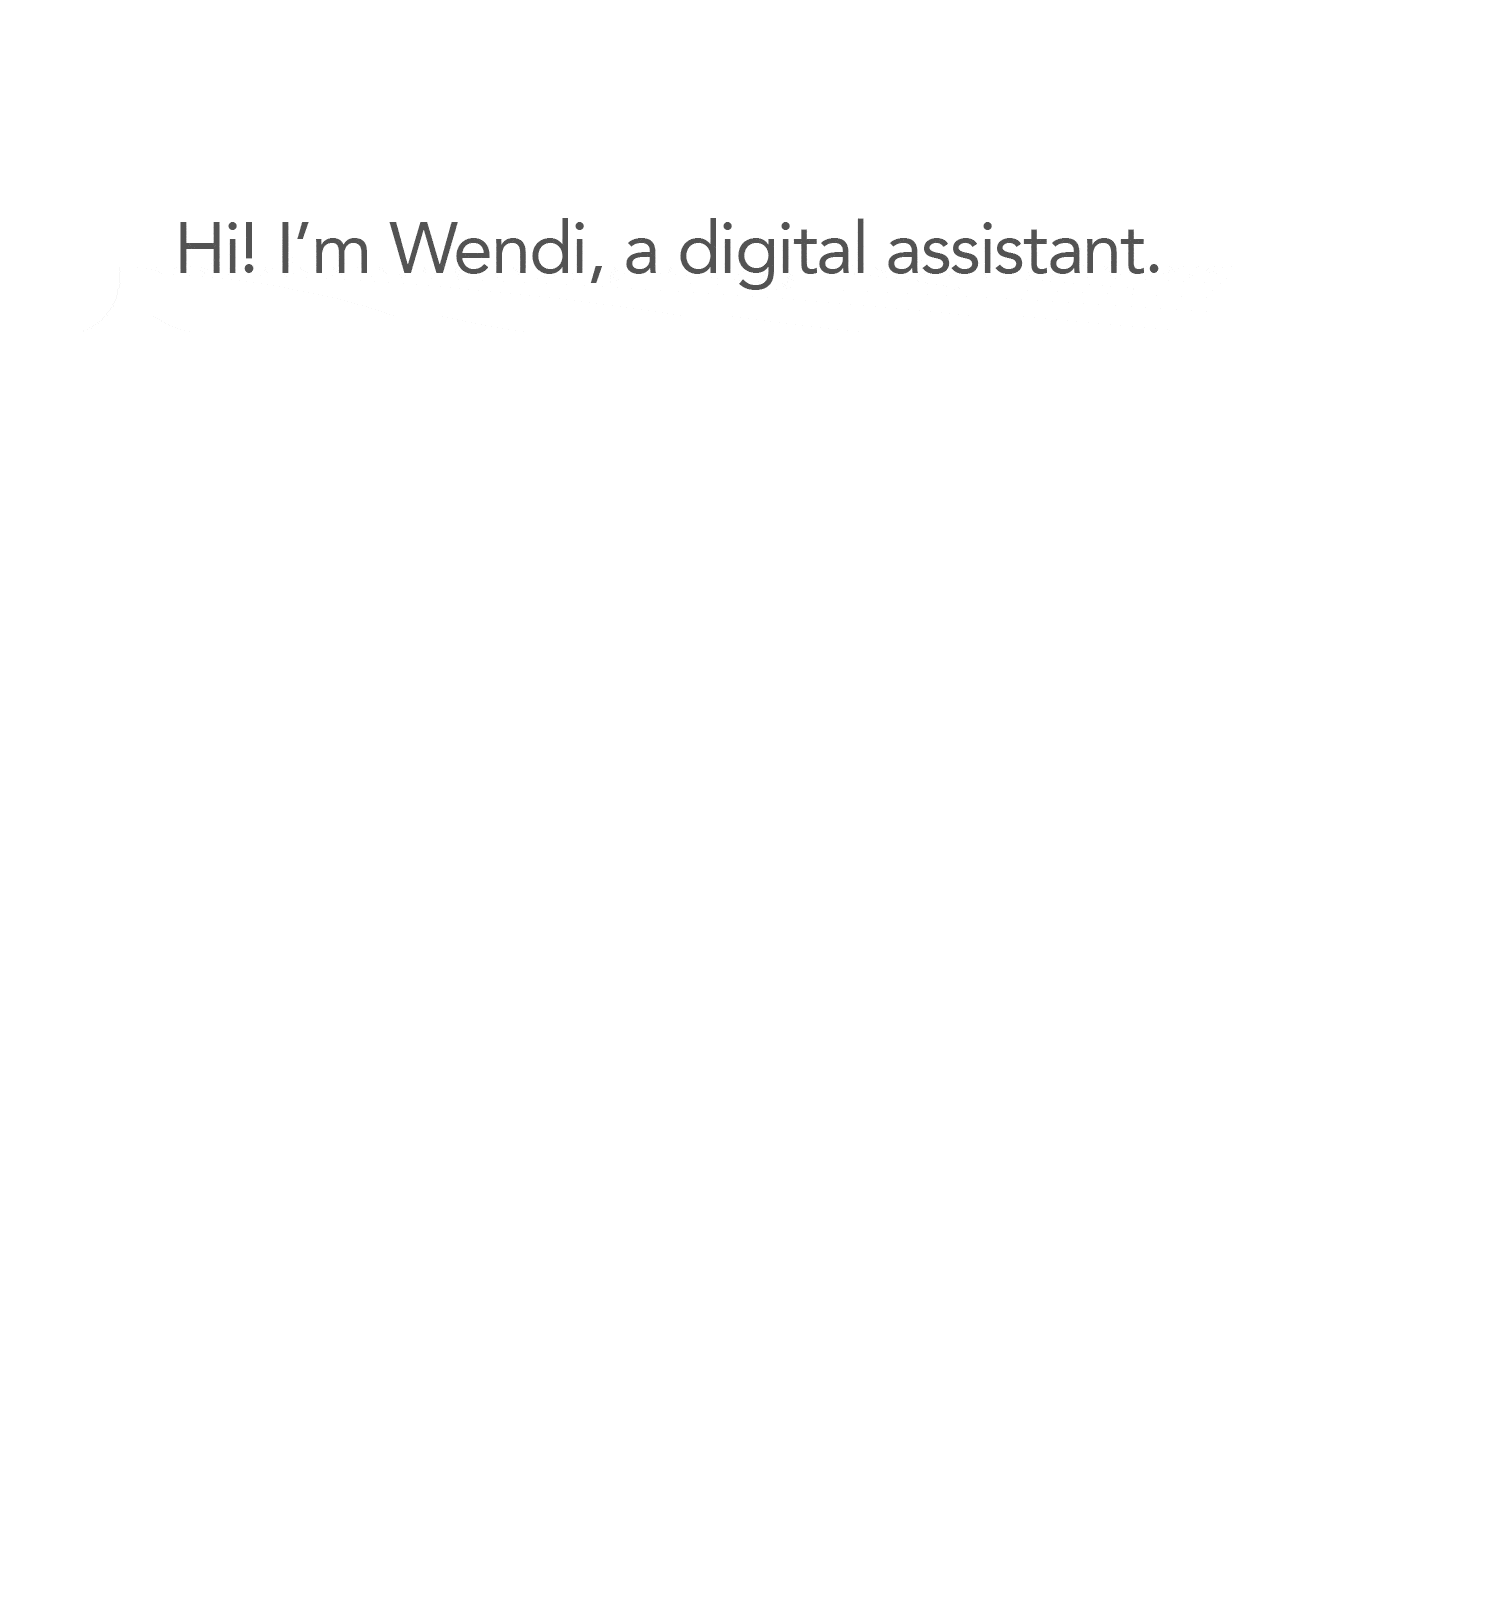 Wendi - A Digital Assistant For Healthcare